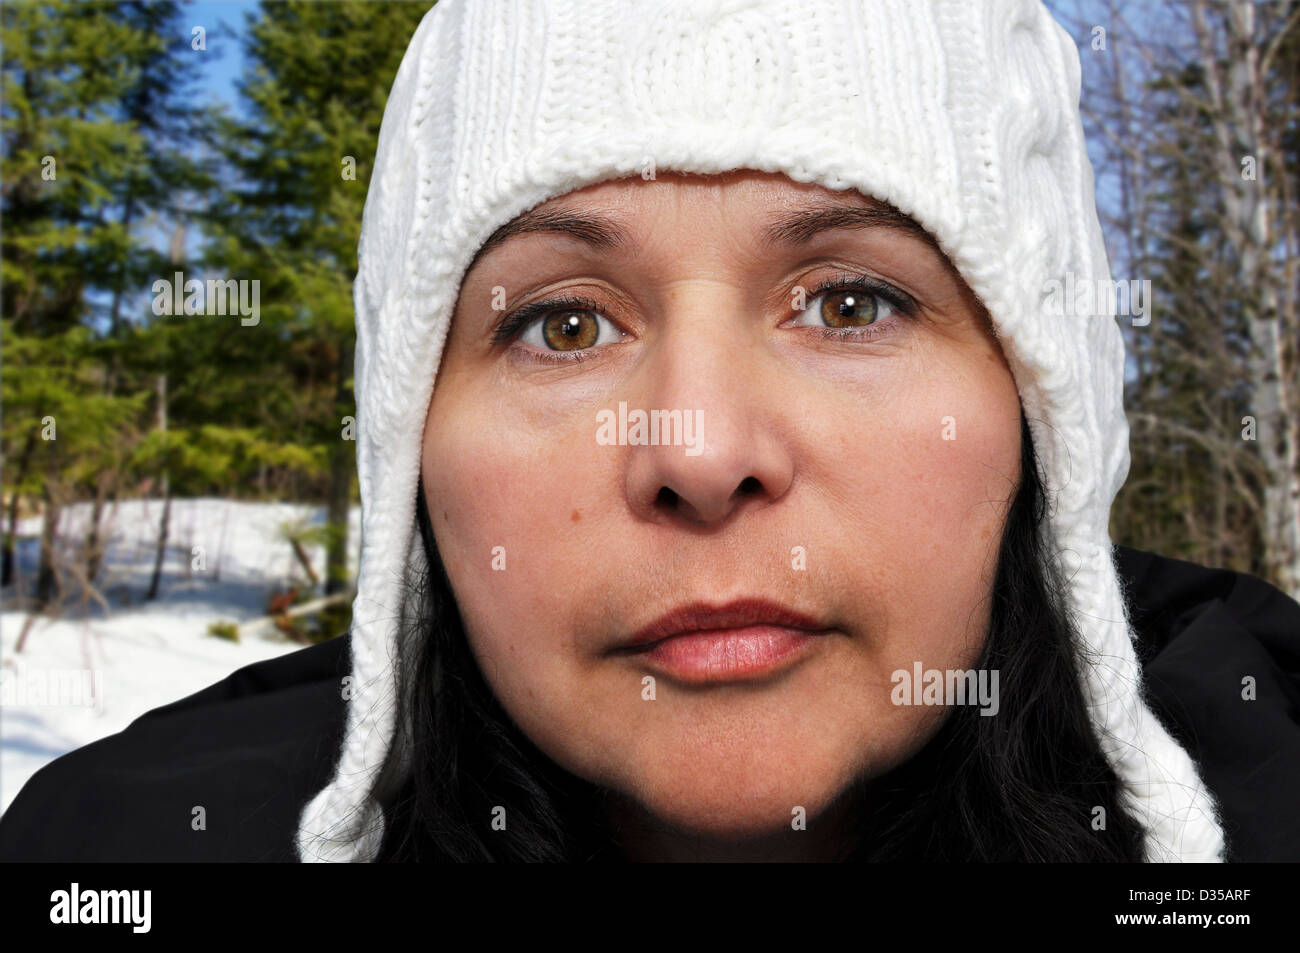 Middle-aged woman outdoor during winter Stock Photo